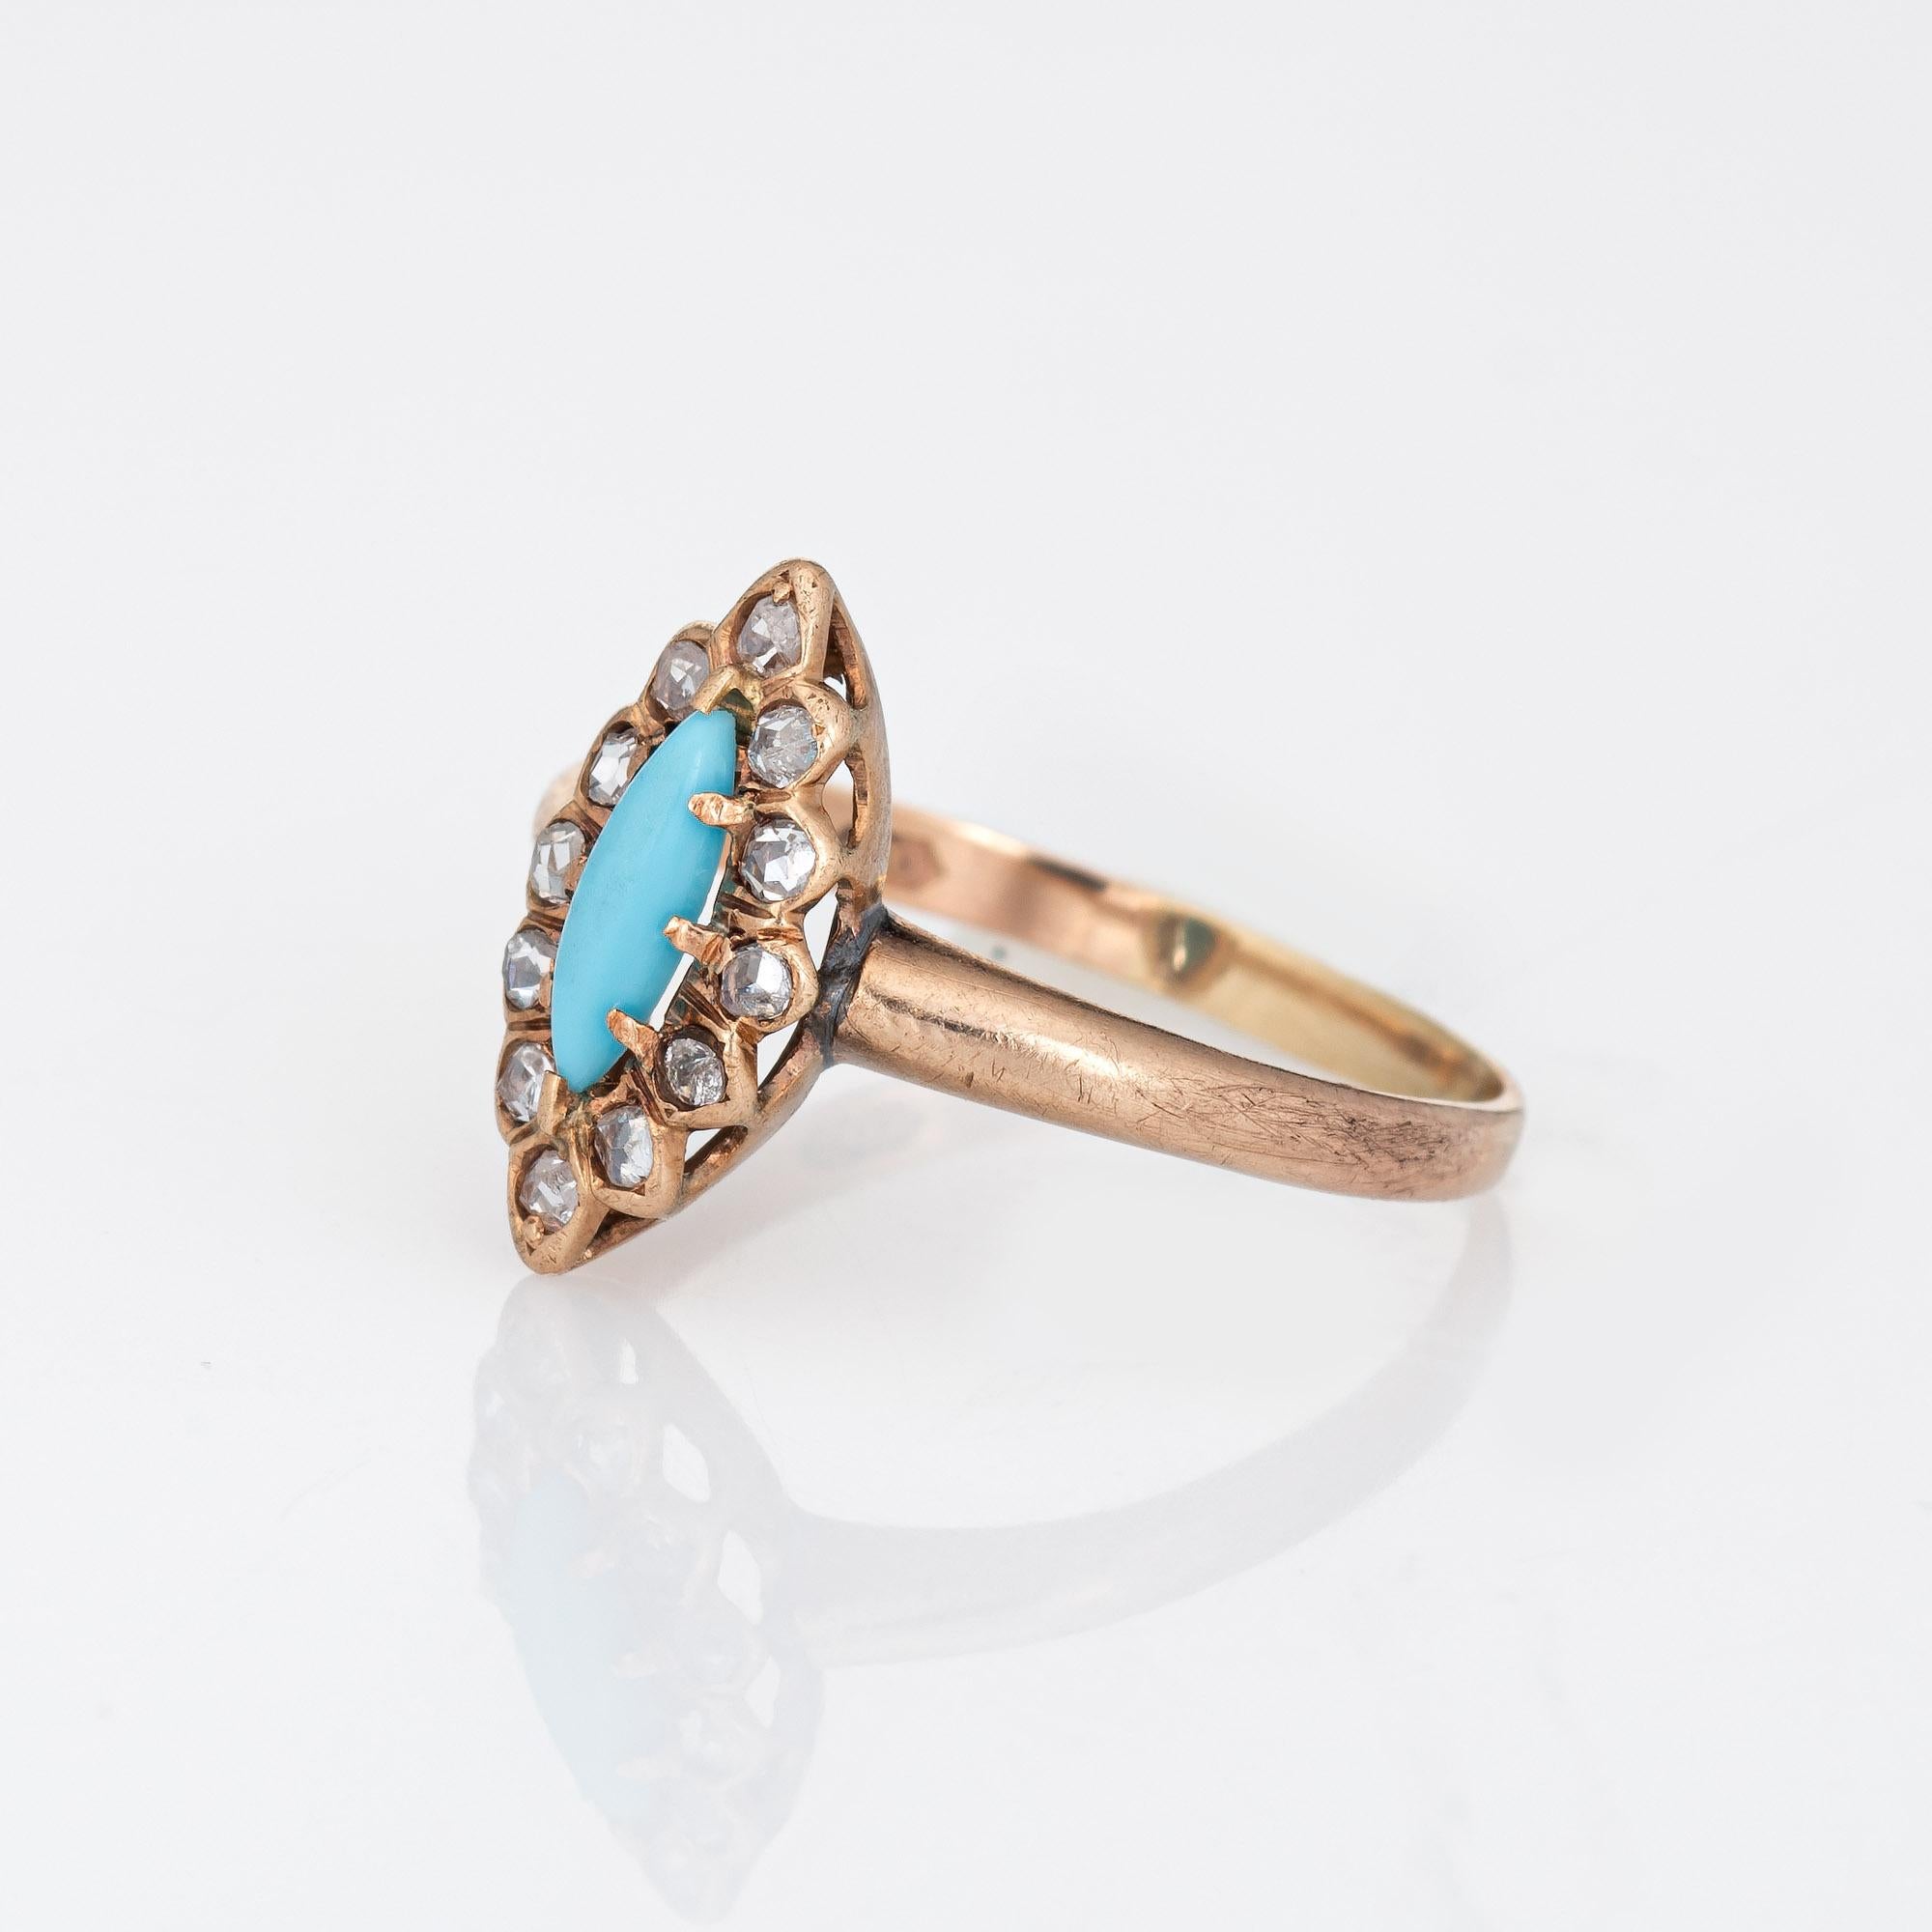 Women's Antique Victorian Navette Ring Old Rose Cut Diamond Turquoise 14k Gold Vintage For Sale